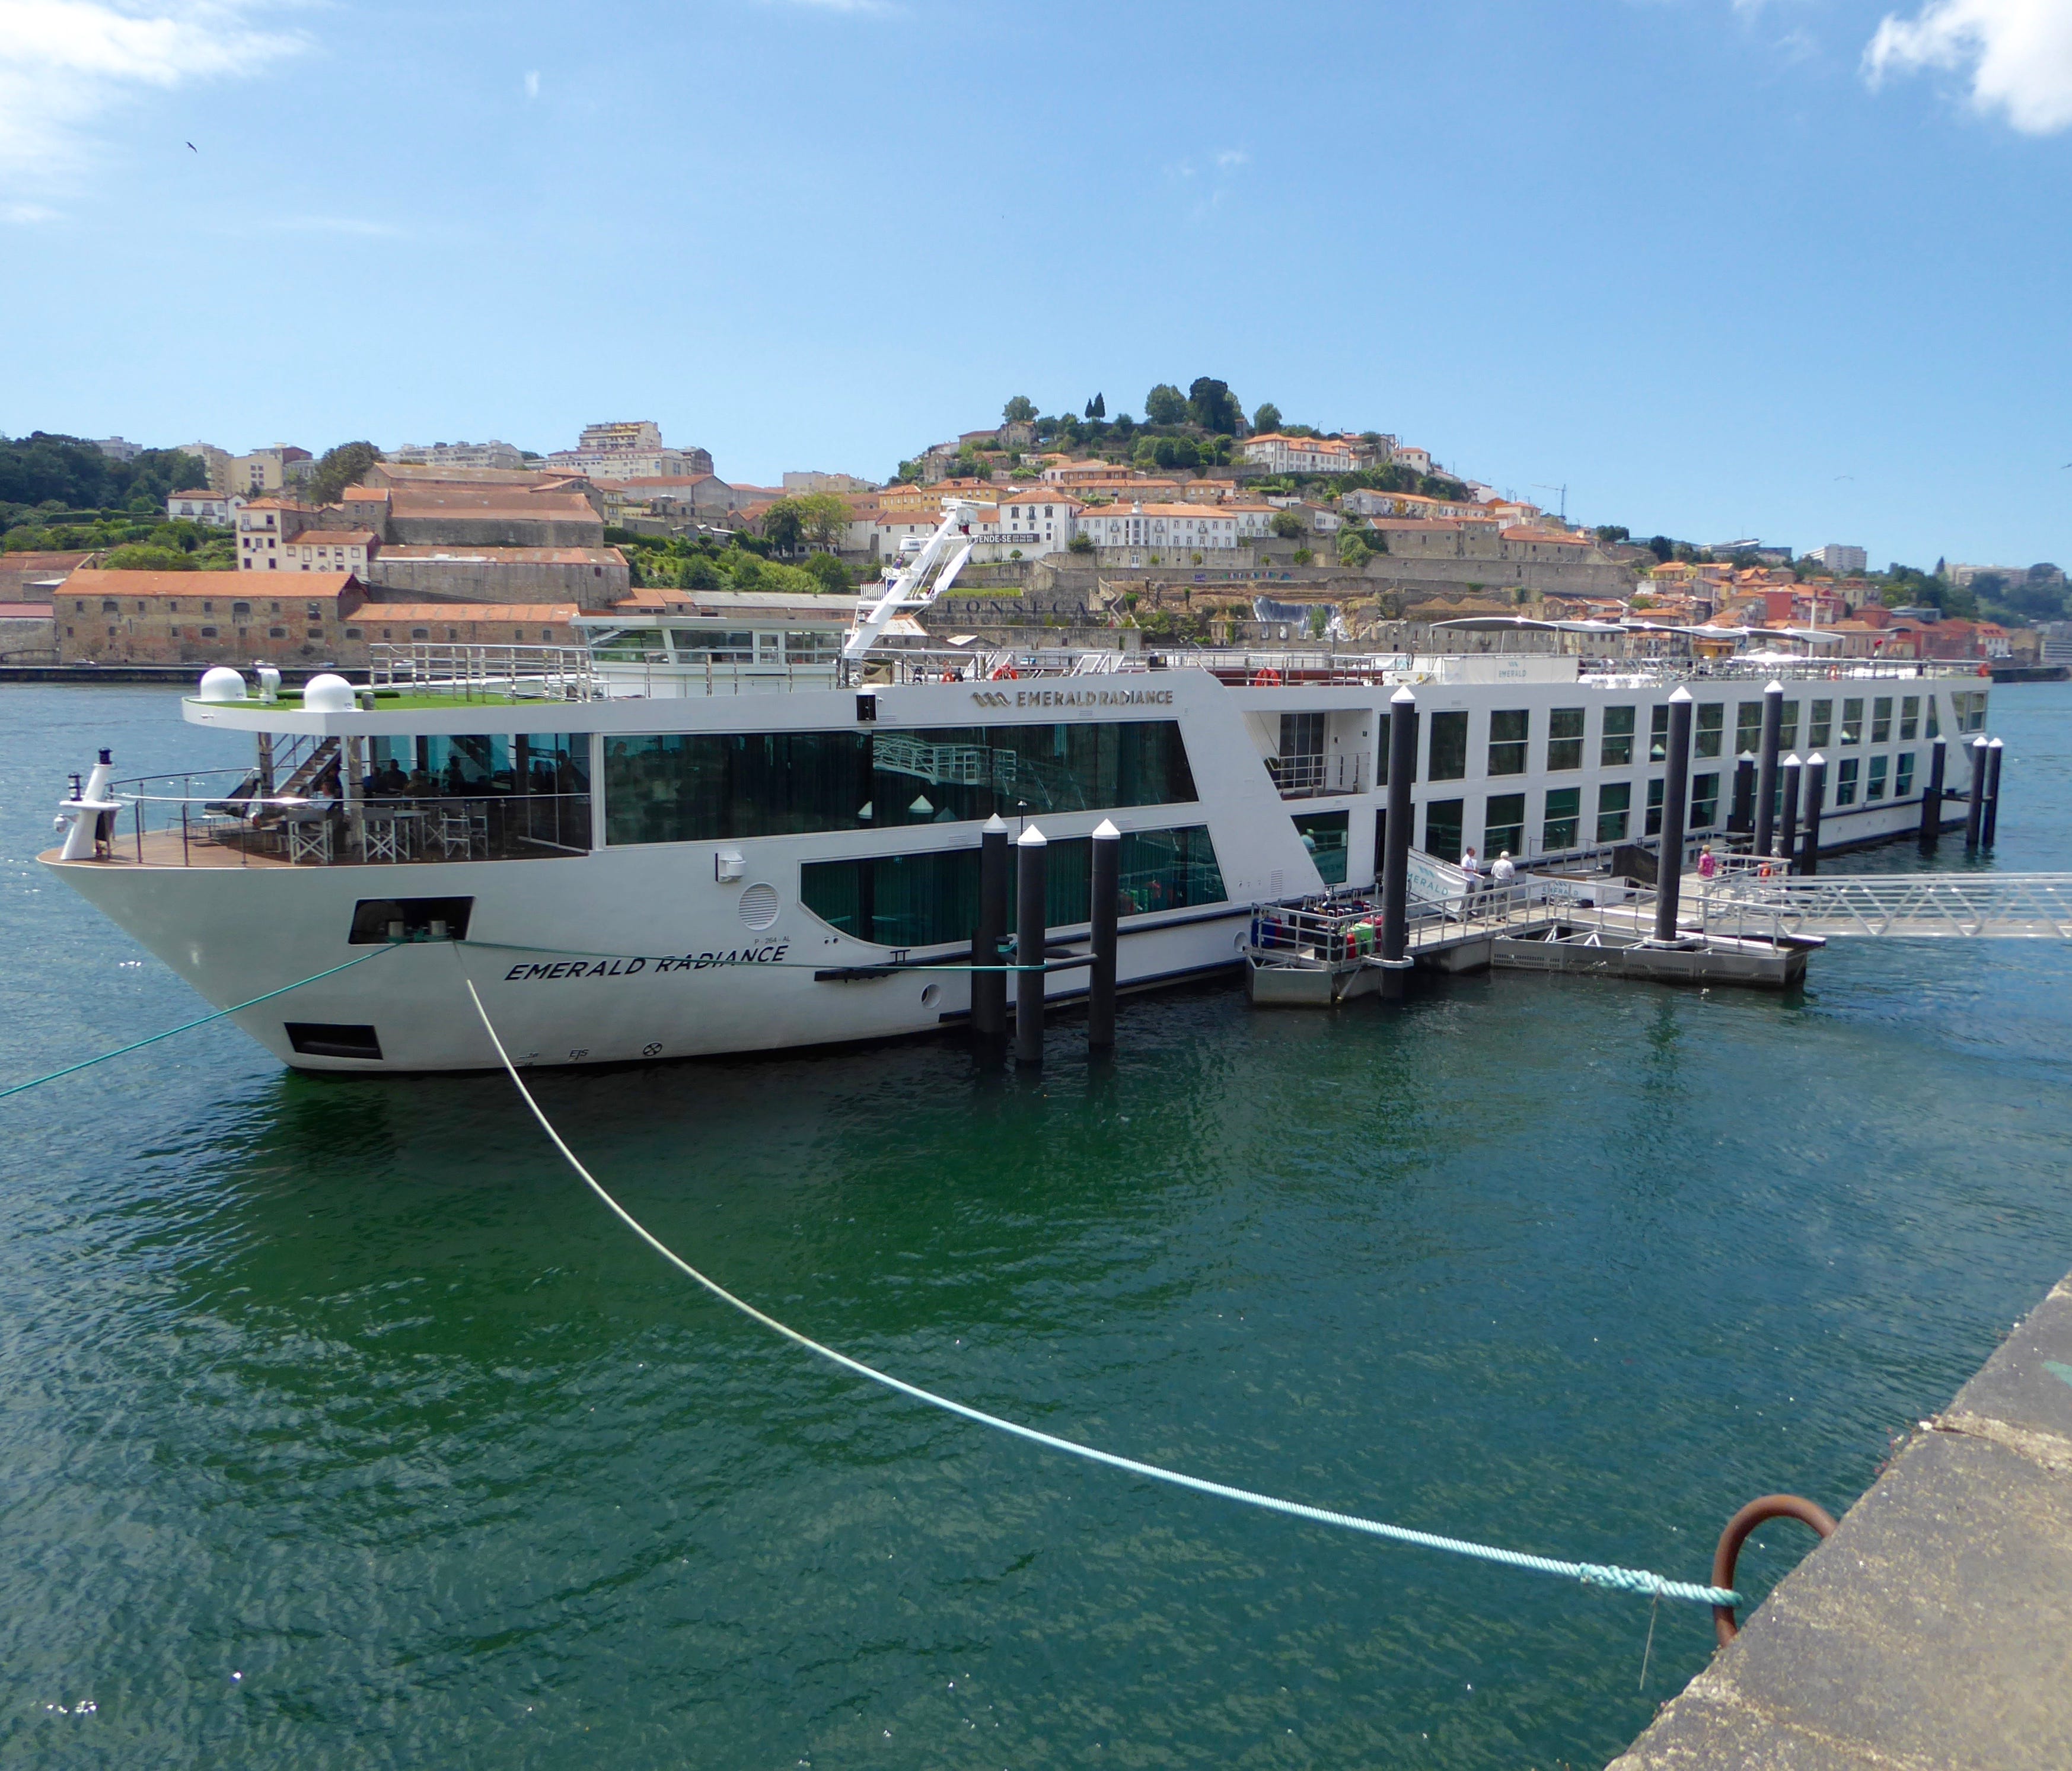 Introduced in 2017, the Emerald Radiance was built for Australian-owned Emerald Waterways for cruise service on Portugal's Douro River.